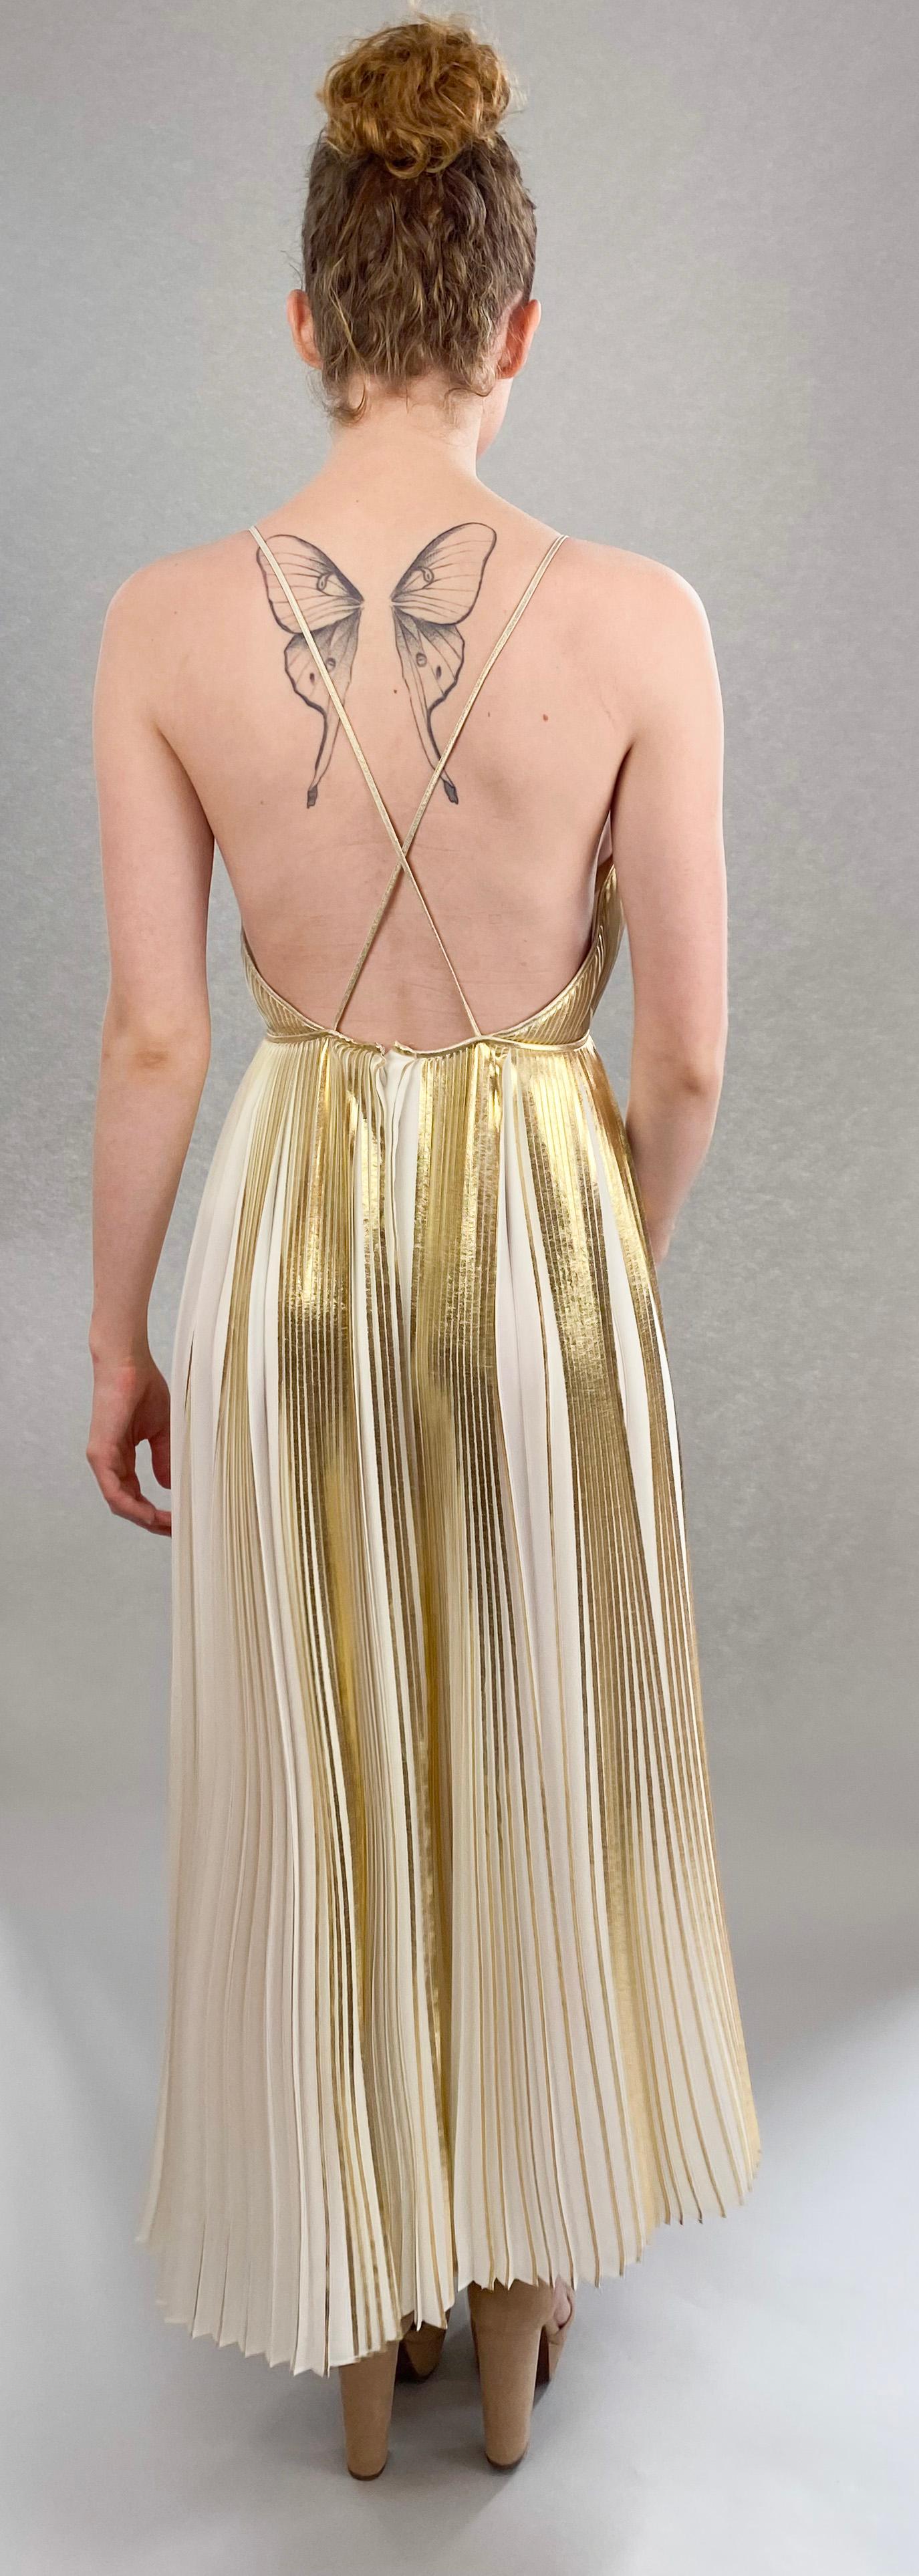 Valentino Gold and White Metallic Pleated Dress For Sale 1